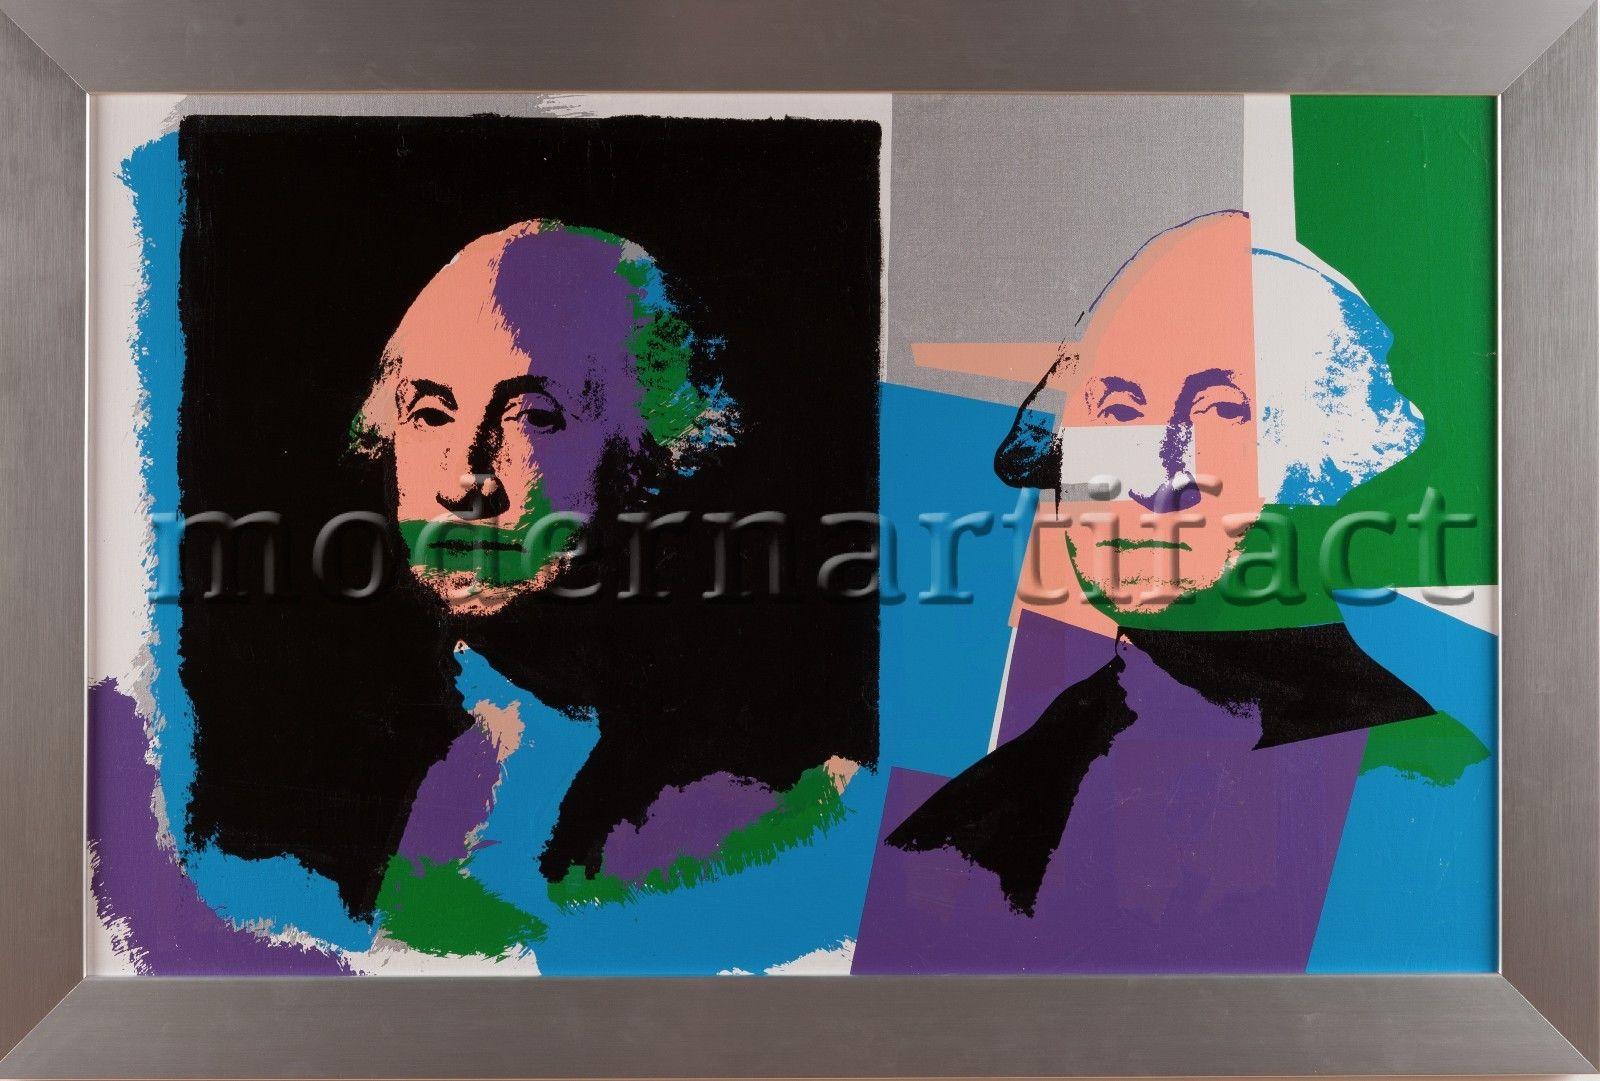 Artist: Steve Kaufman
Title: George Washington
Medium: Original Oil Painting on Screen print Canvas
Size: "26 3/4: x 42 1/2"
Size Framed: 32 1/2" x 48 1/2"
Edition size: 17/5opp
Signed on the the back

Condition: This piece is in perfect condition. 